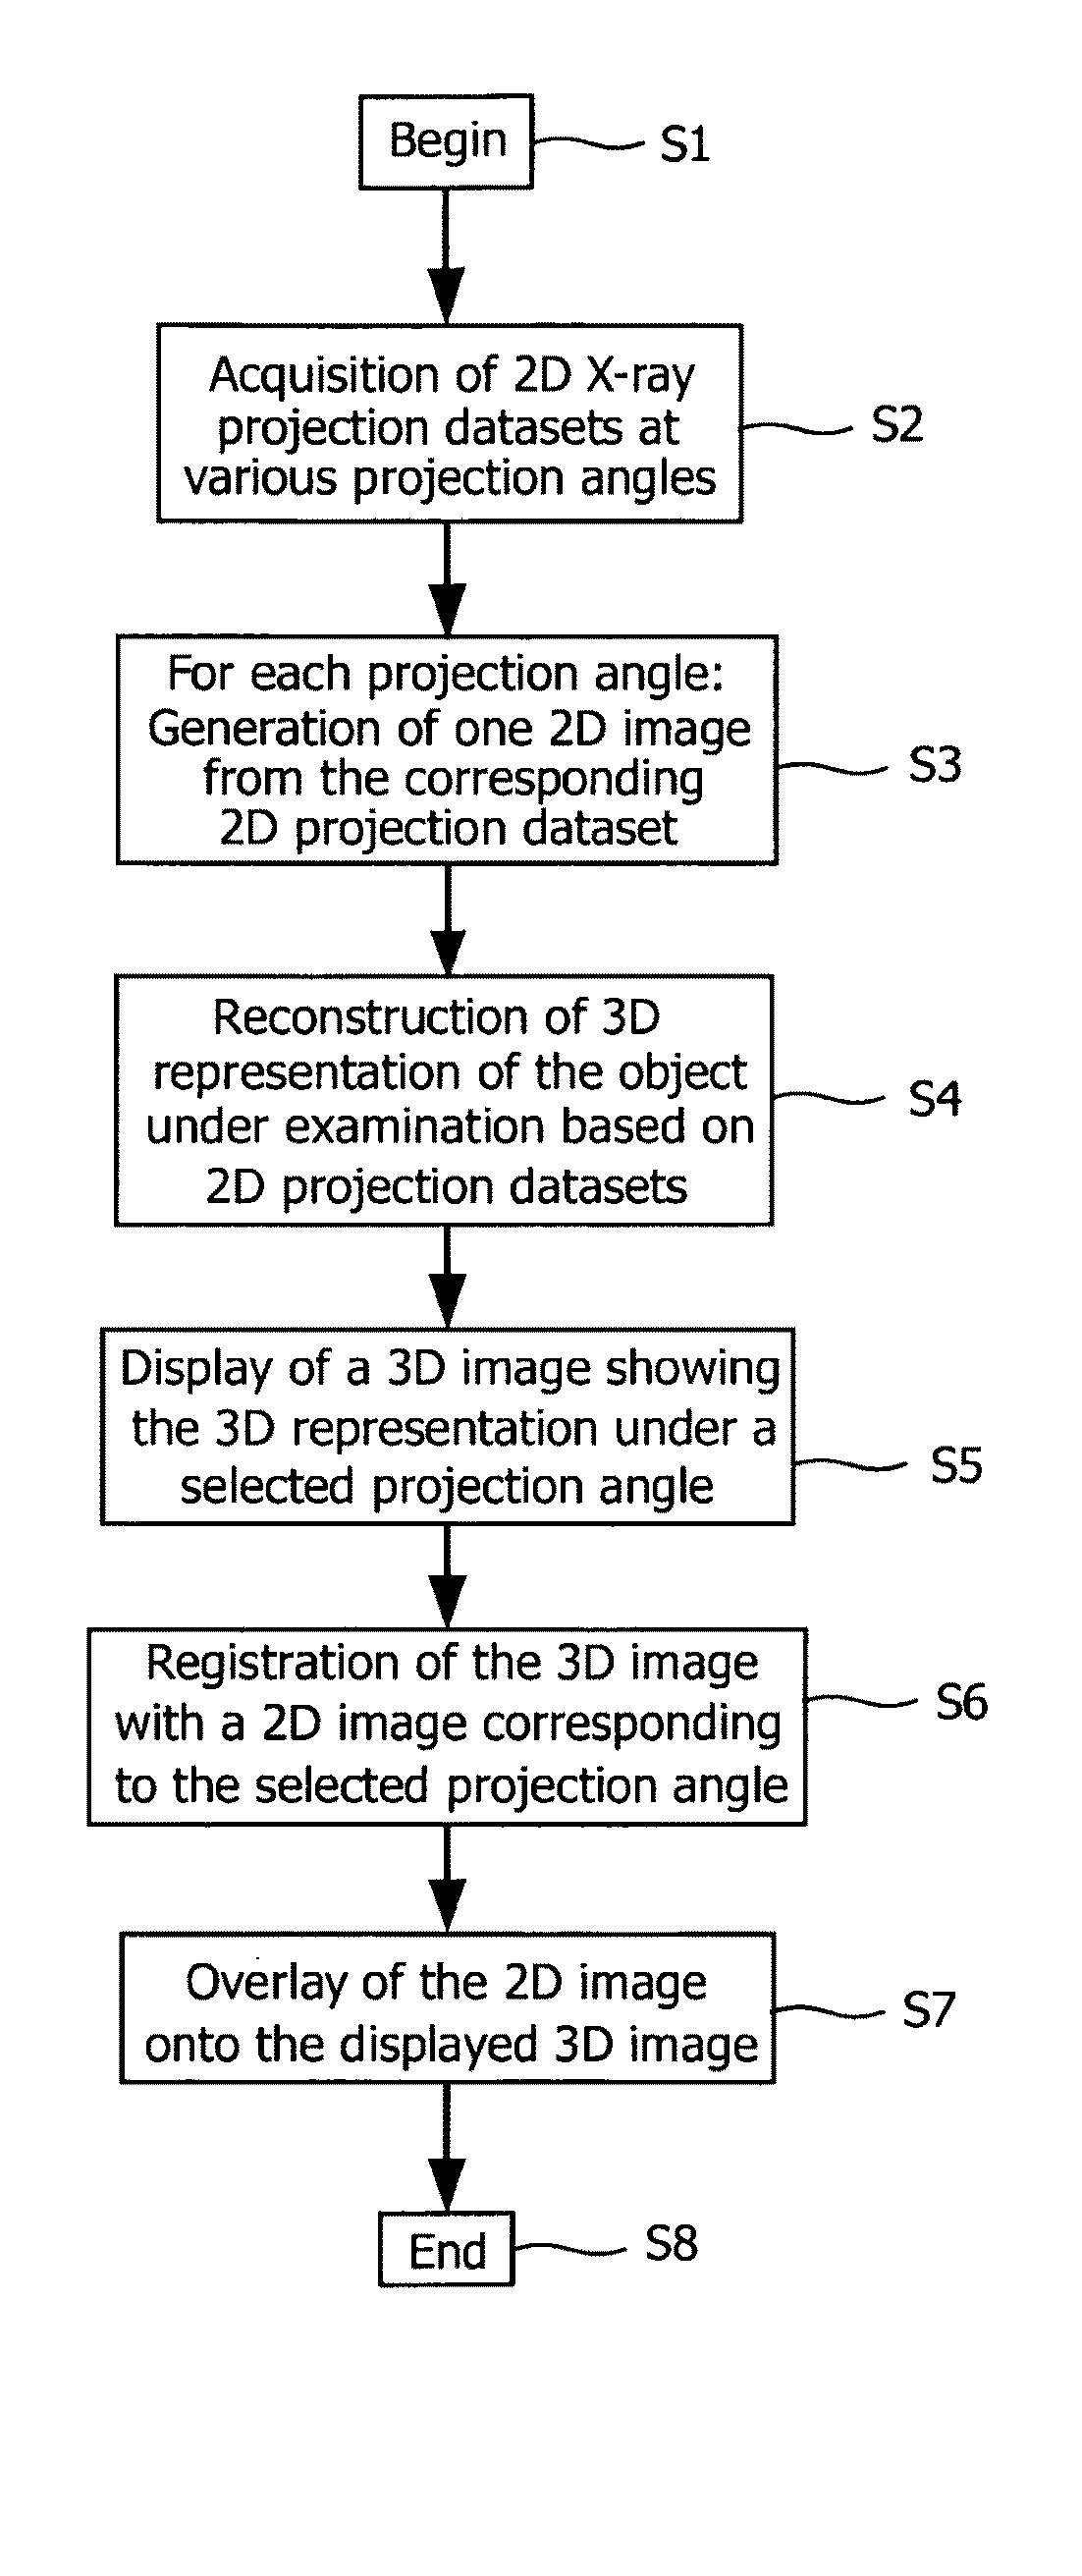 Visualization of 3D images in combination with 2D projection images